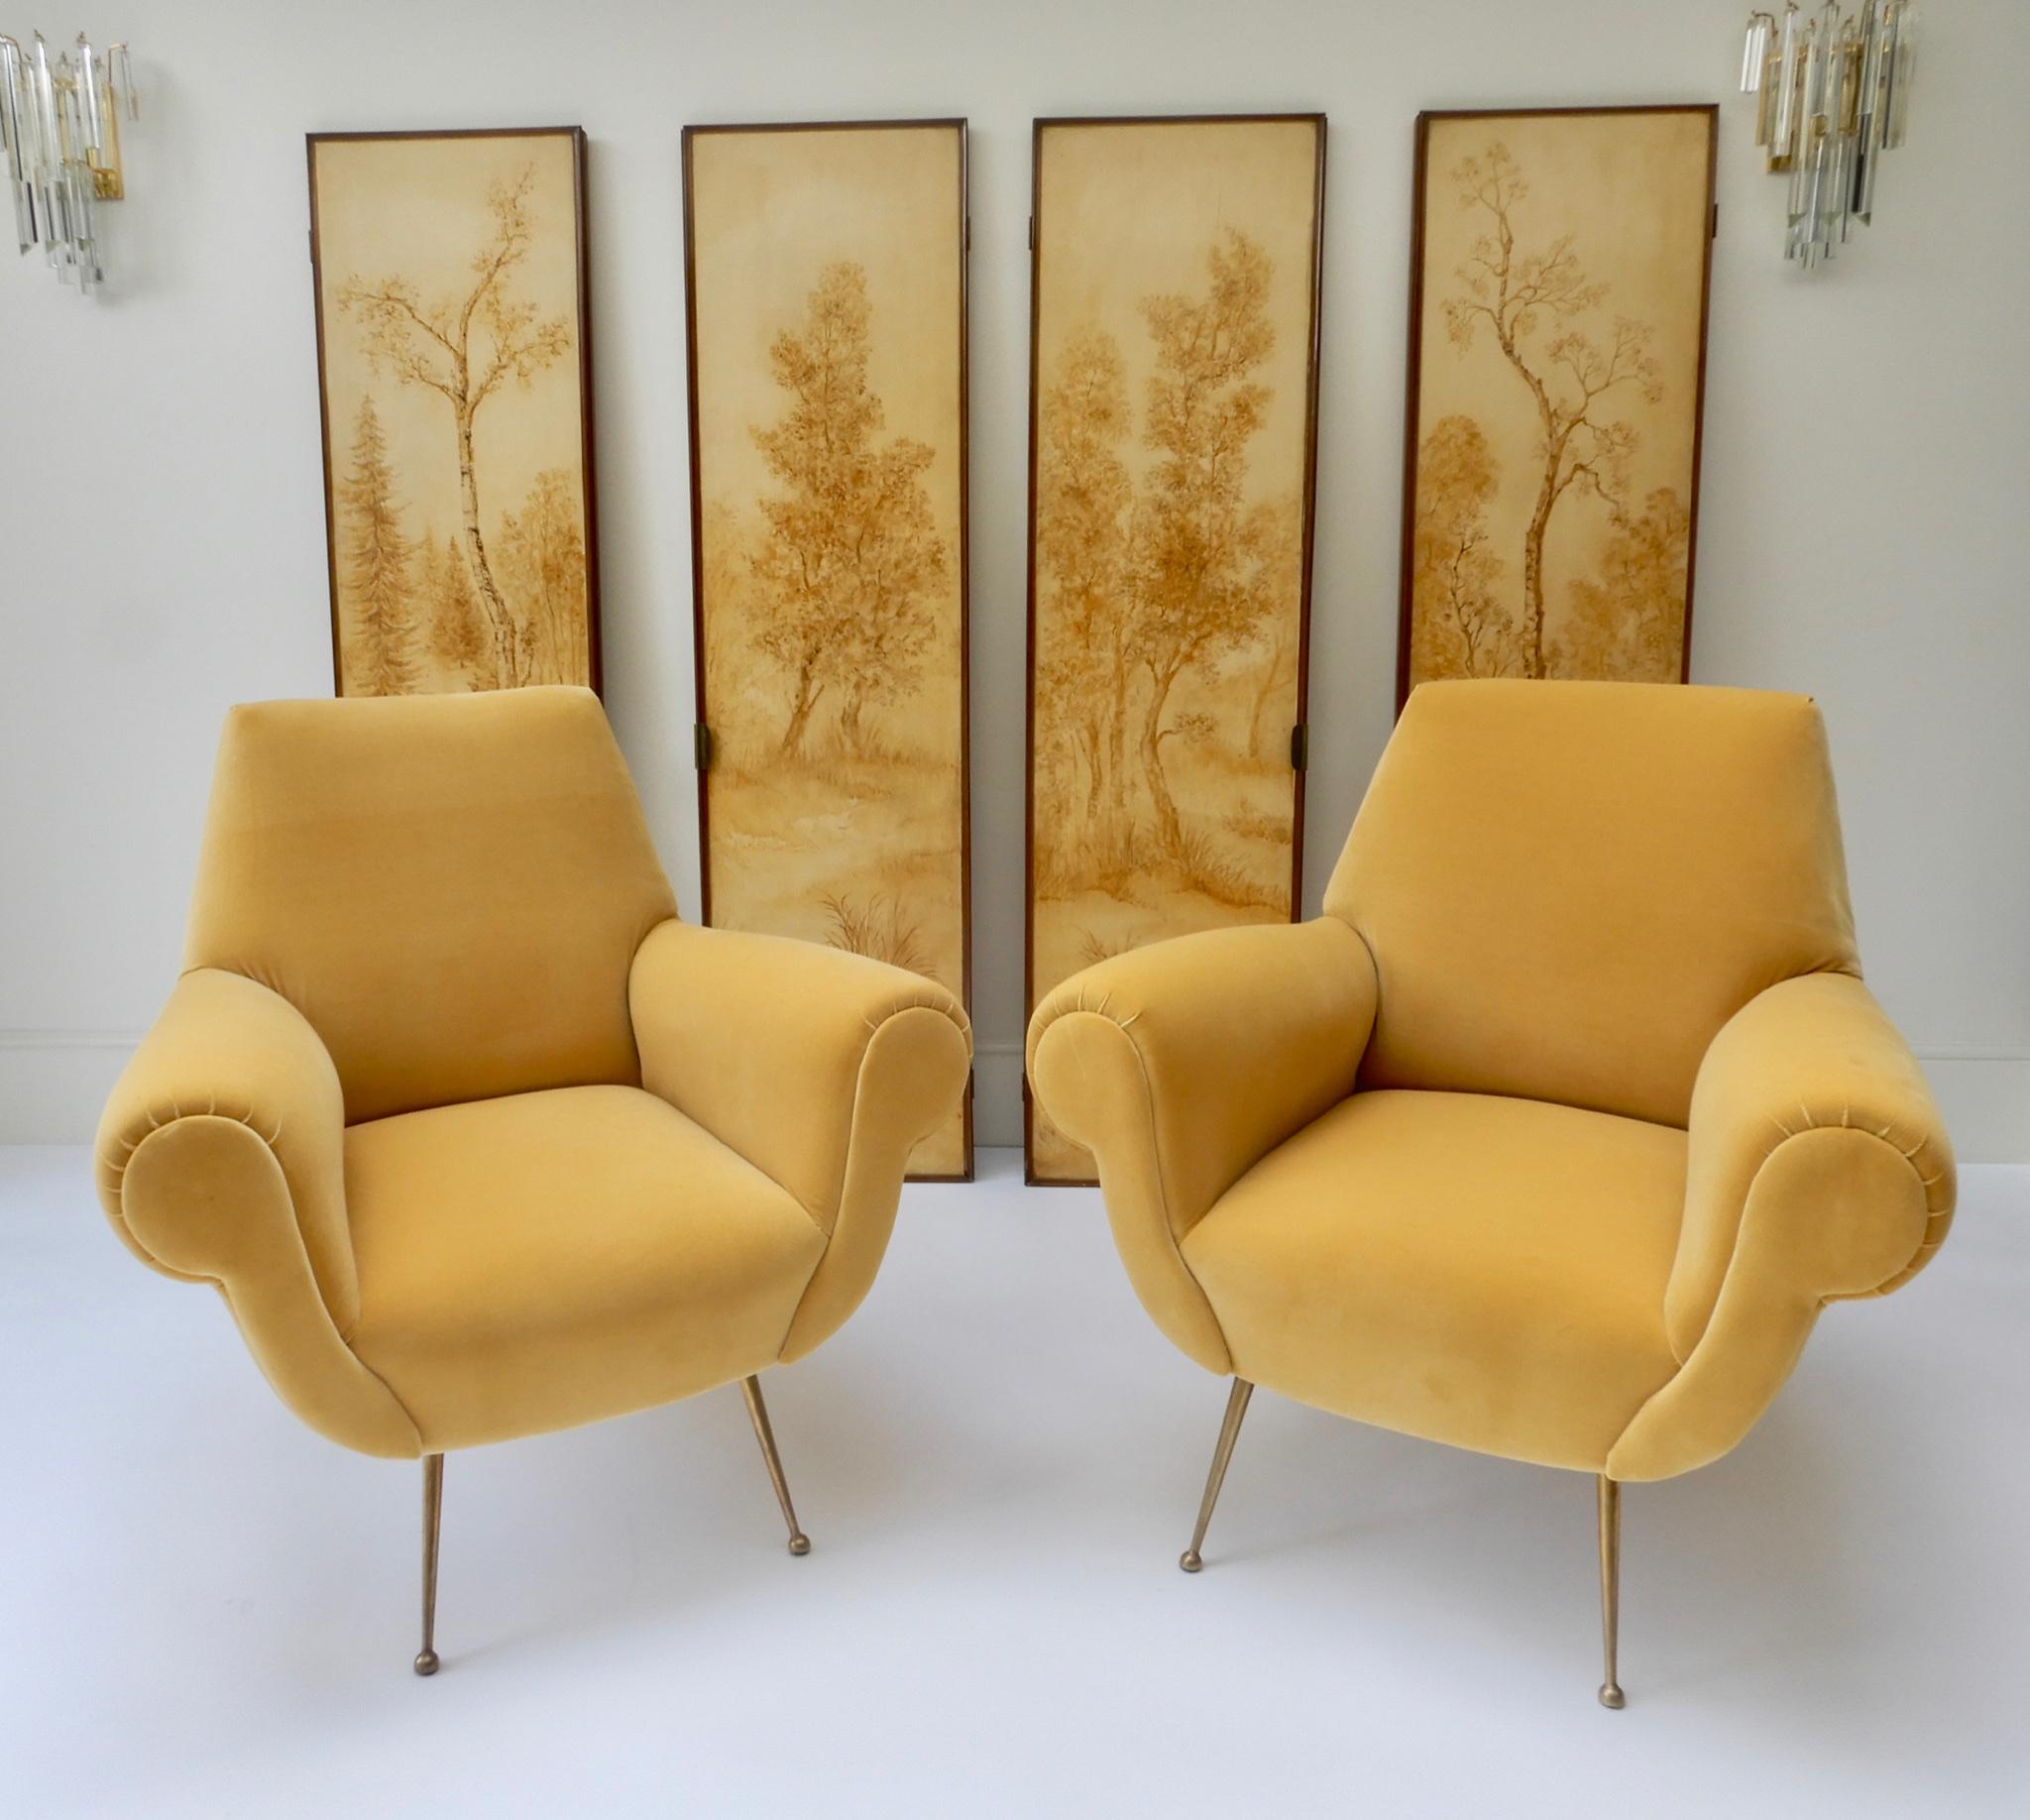 Set of Four Italian Painted Decorative Wall Panels, 1950s 2